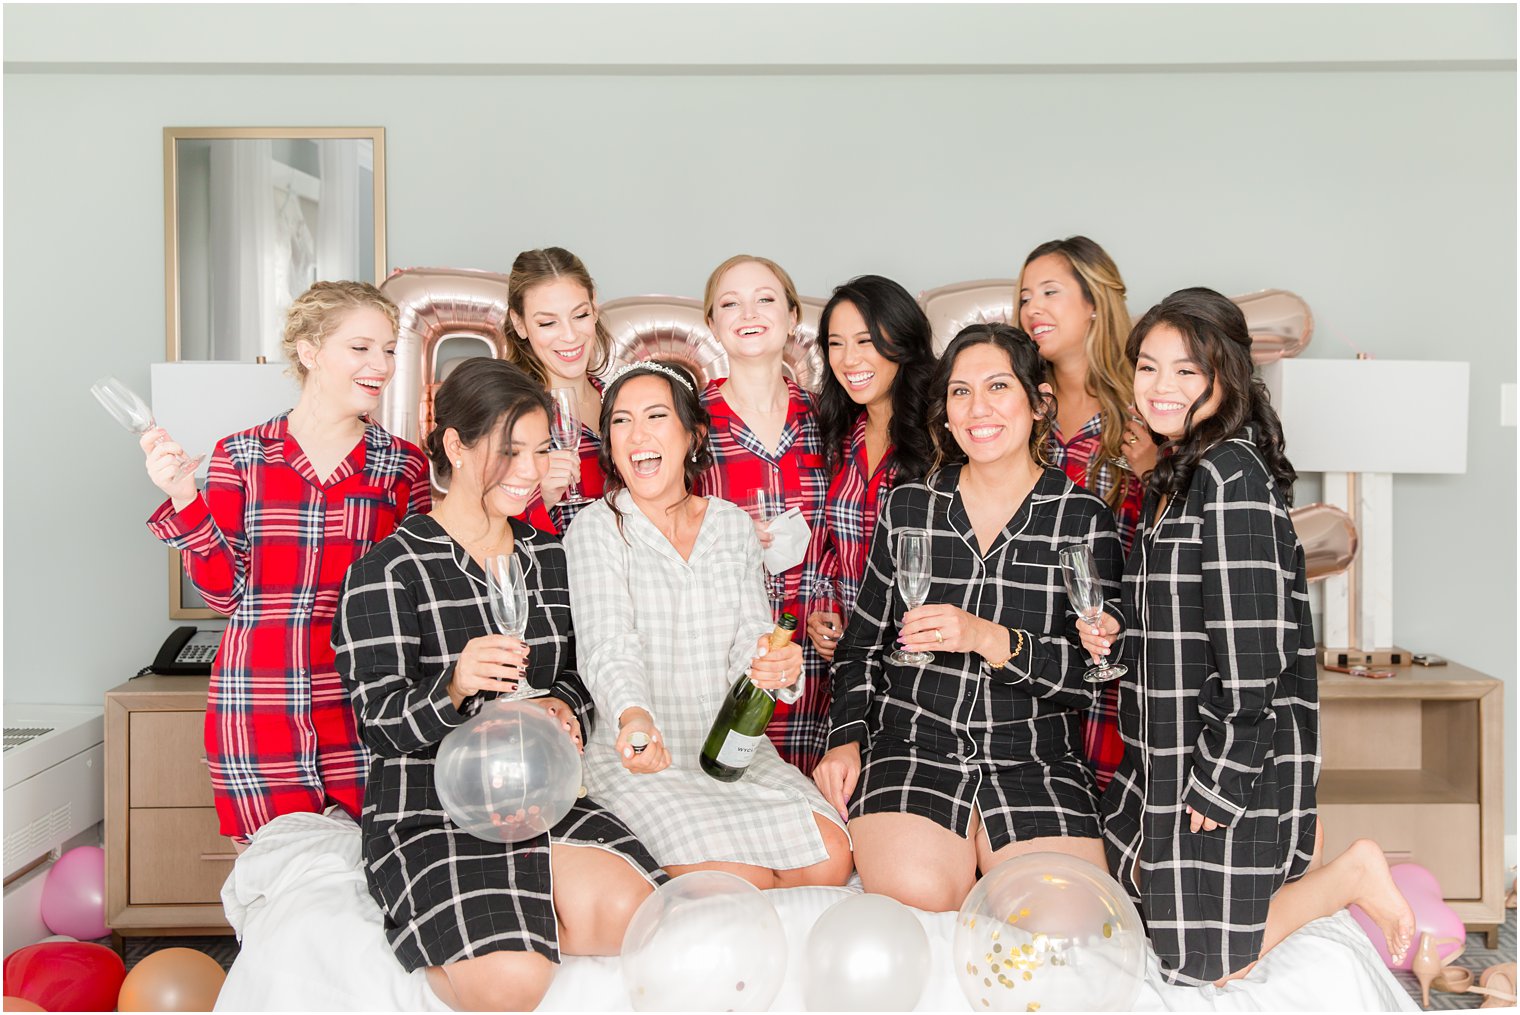 bride poses with bridesmaids on bed with balloons and champagne